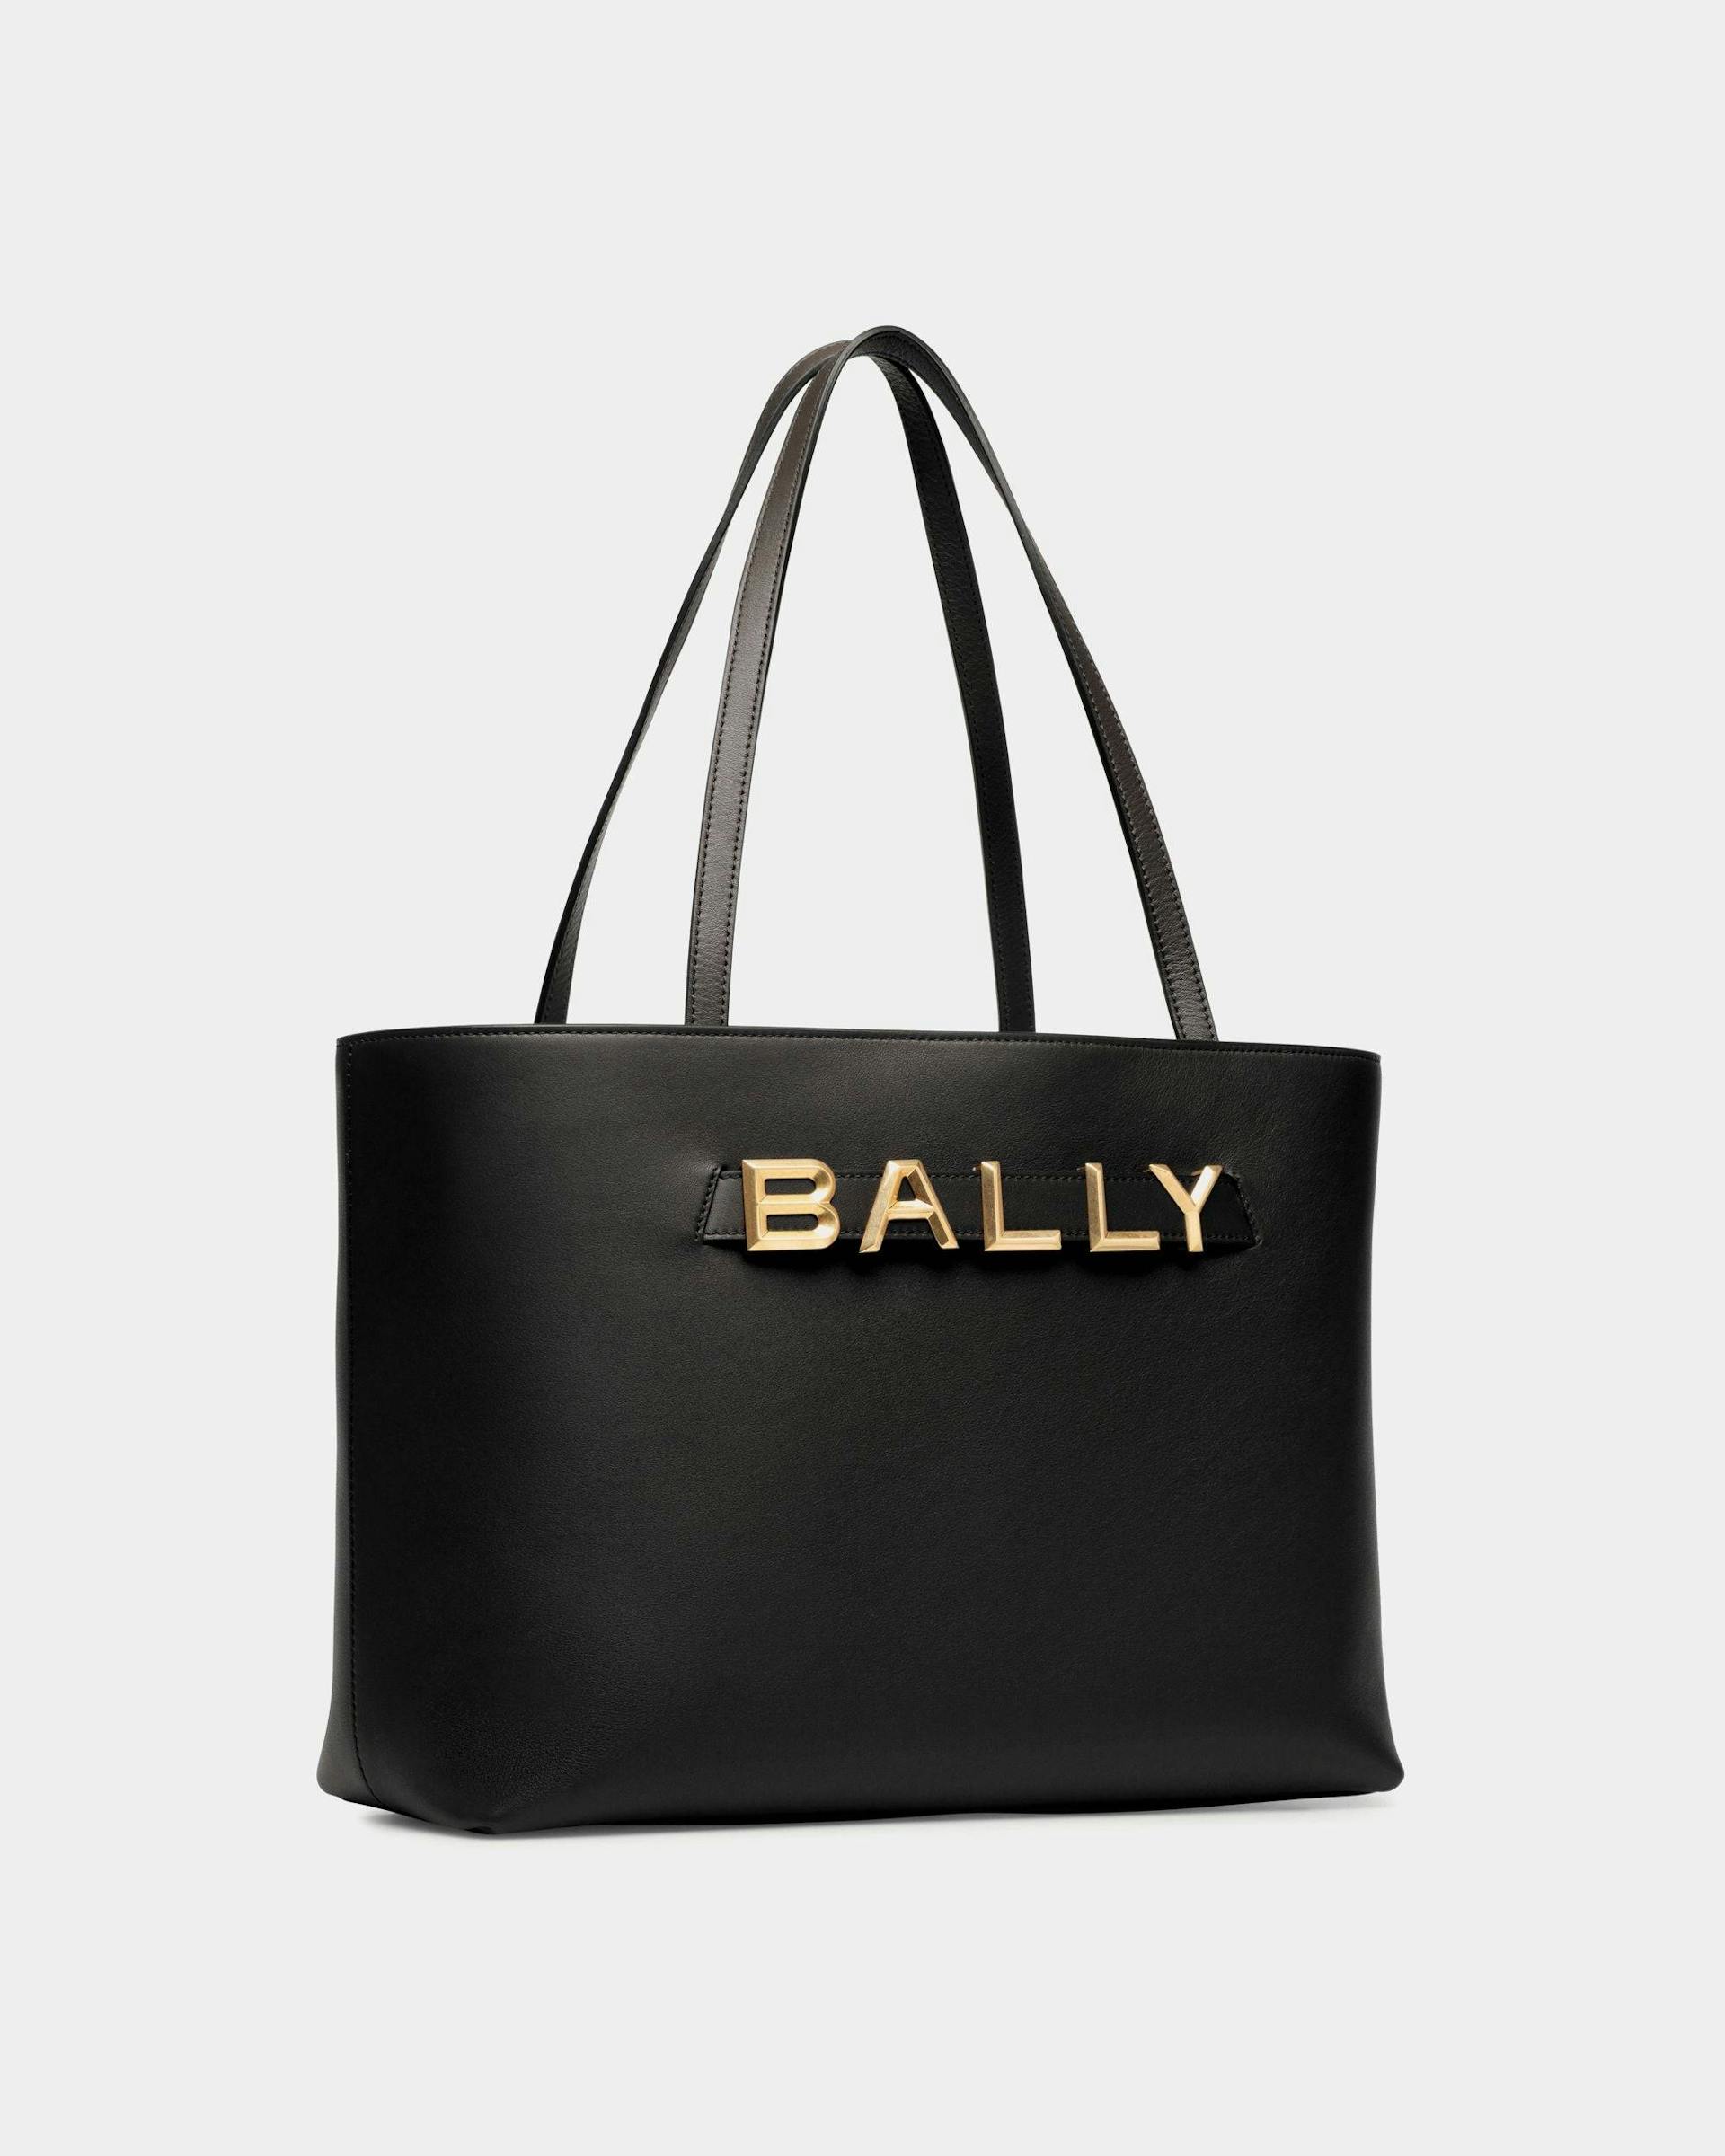 Women's Bally Spell Tote Bag in Black Leather | Bally | Still Life 3/4 Front